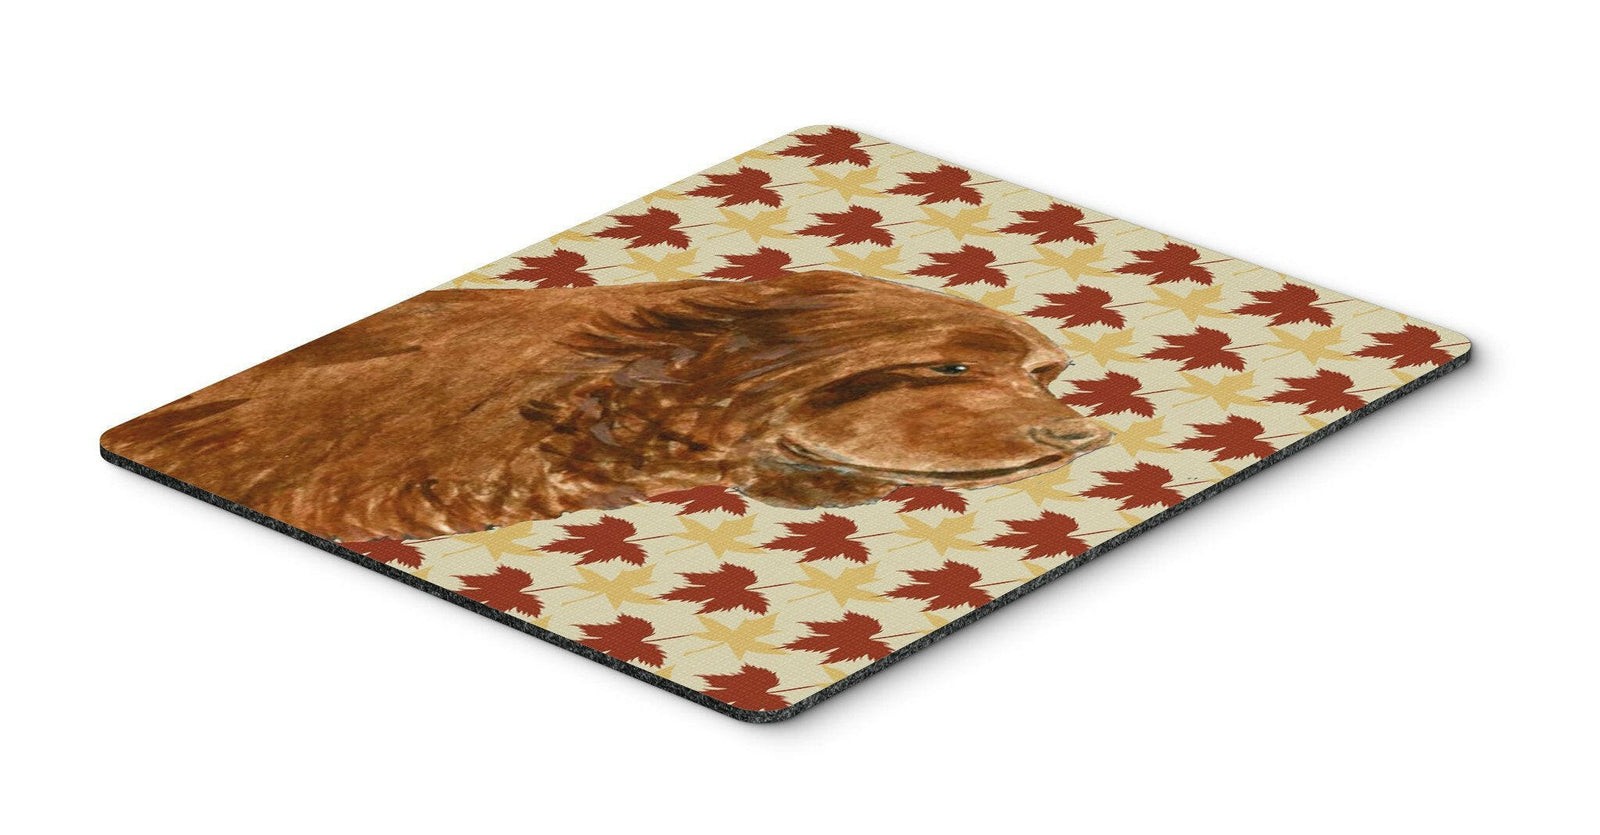 Sussex Spaniel Fall Leaves Portrait Mouse Pad, Hot Pad or Trivet by Caroline's Treasures